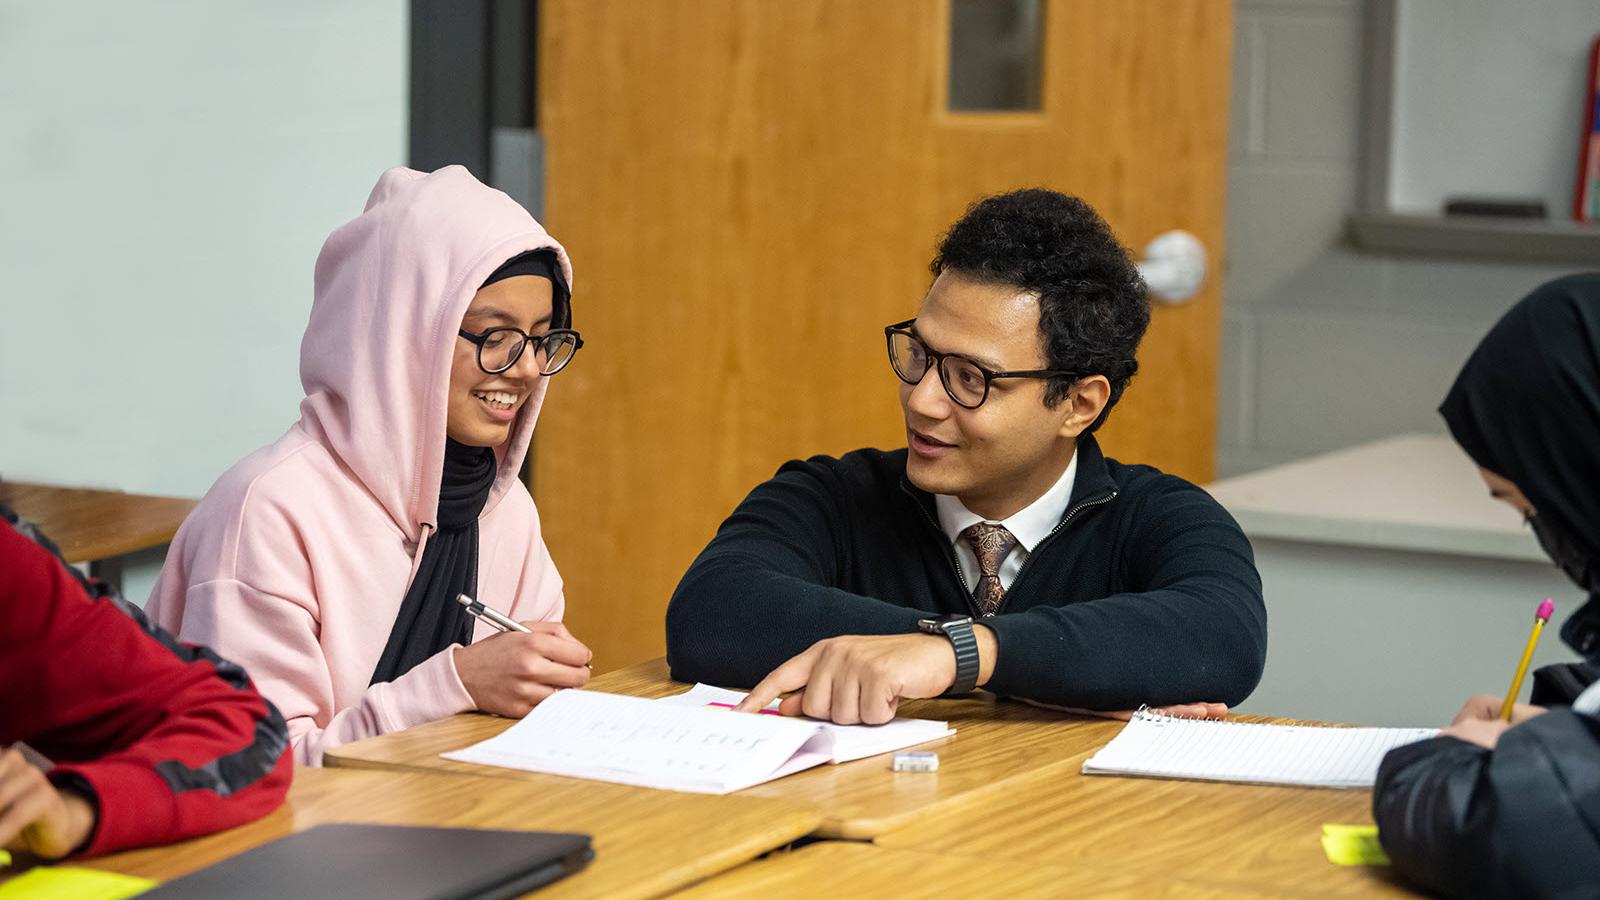 Arabic teacher working with student